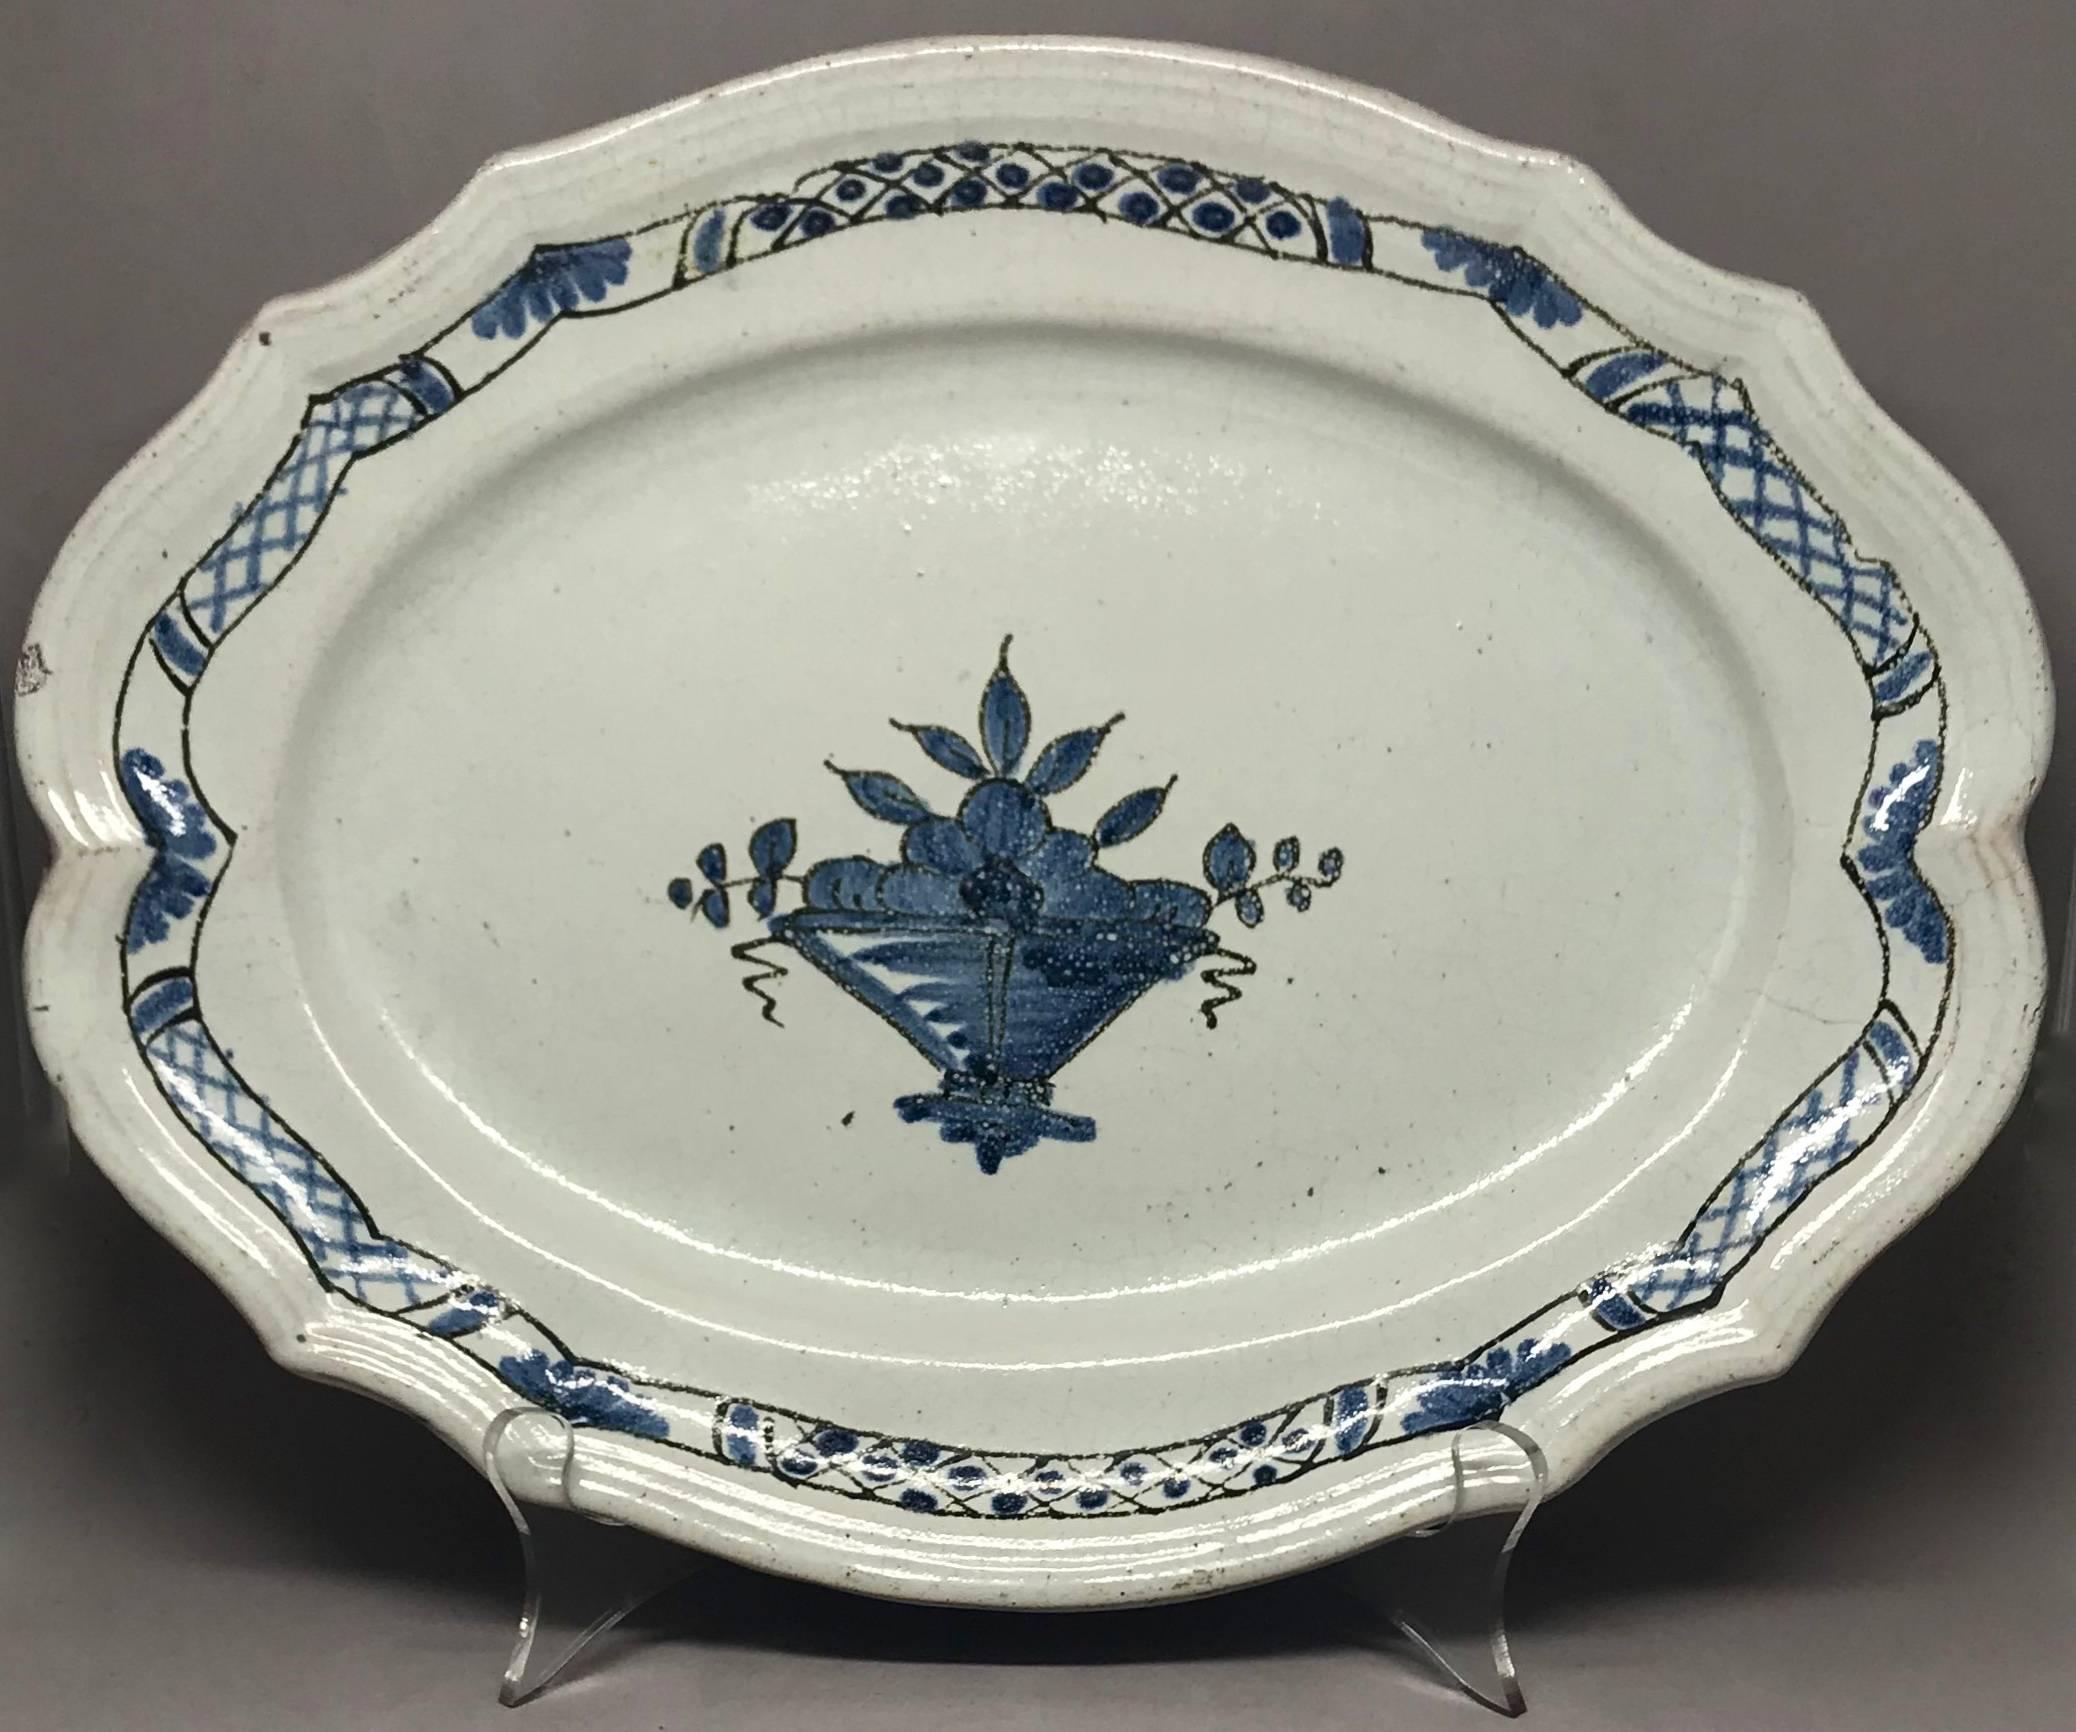 Rouen blue and white faience platter. Shaped oval earthenware white glazed platter with blue decorative banded border centering on a stylized fruit basket of the cul noir process possibly from Eaux-des-Forges outside Rouen. France, 19th